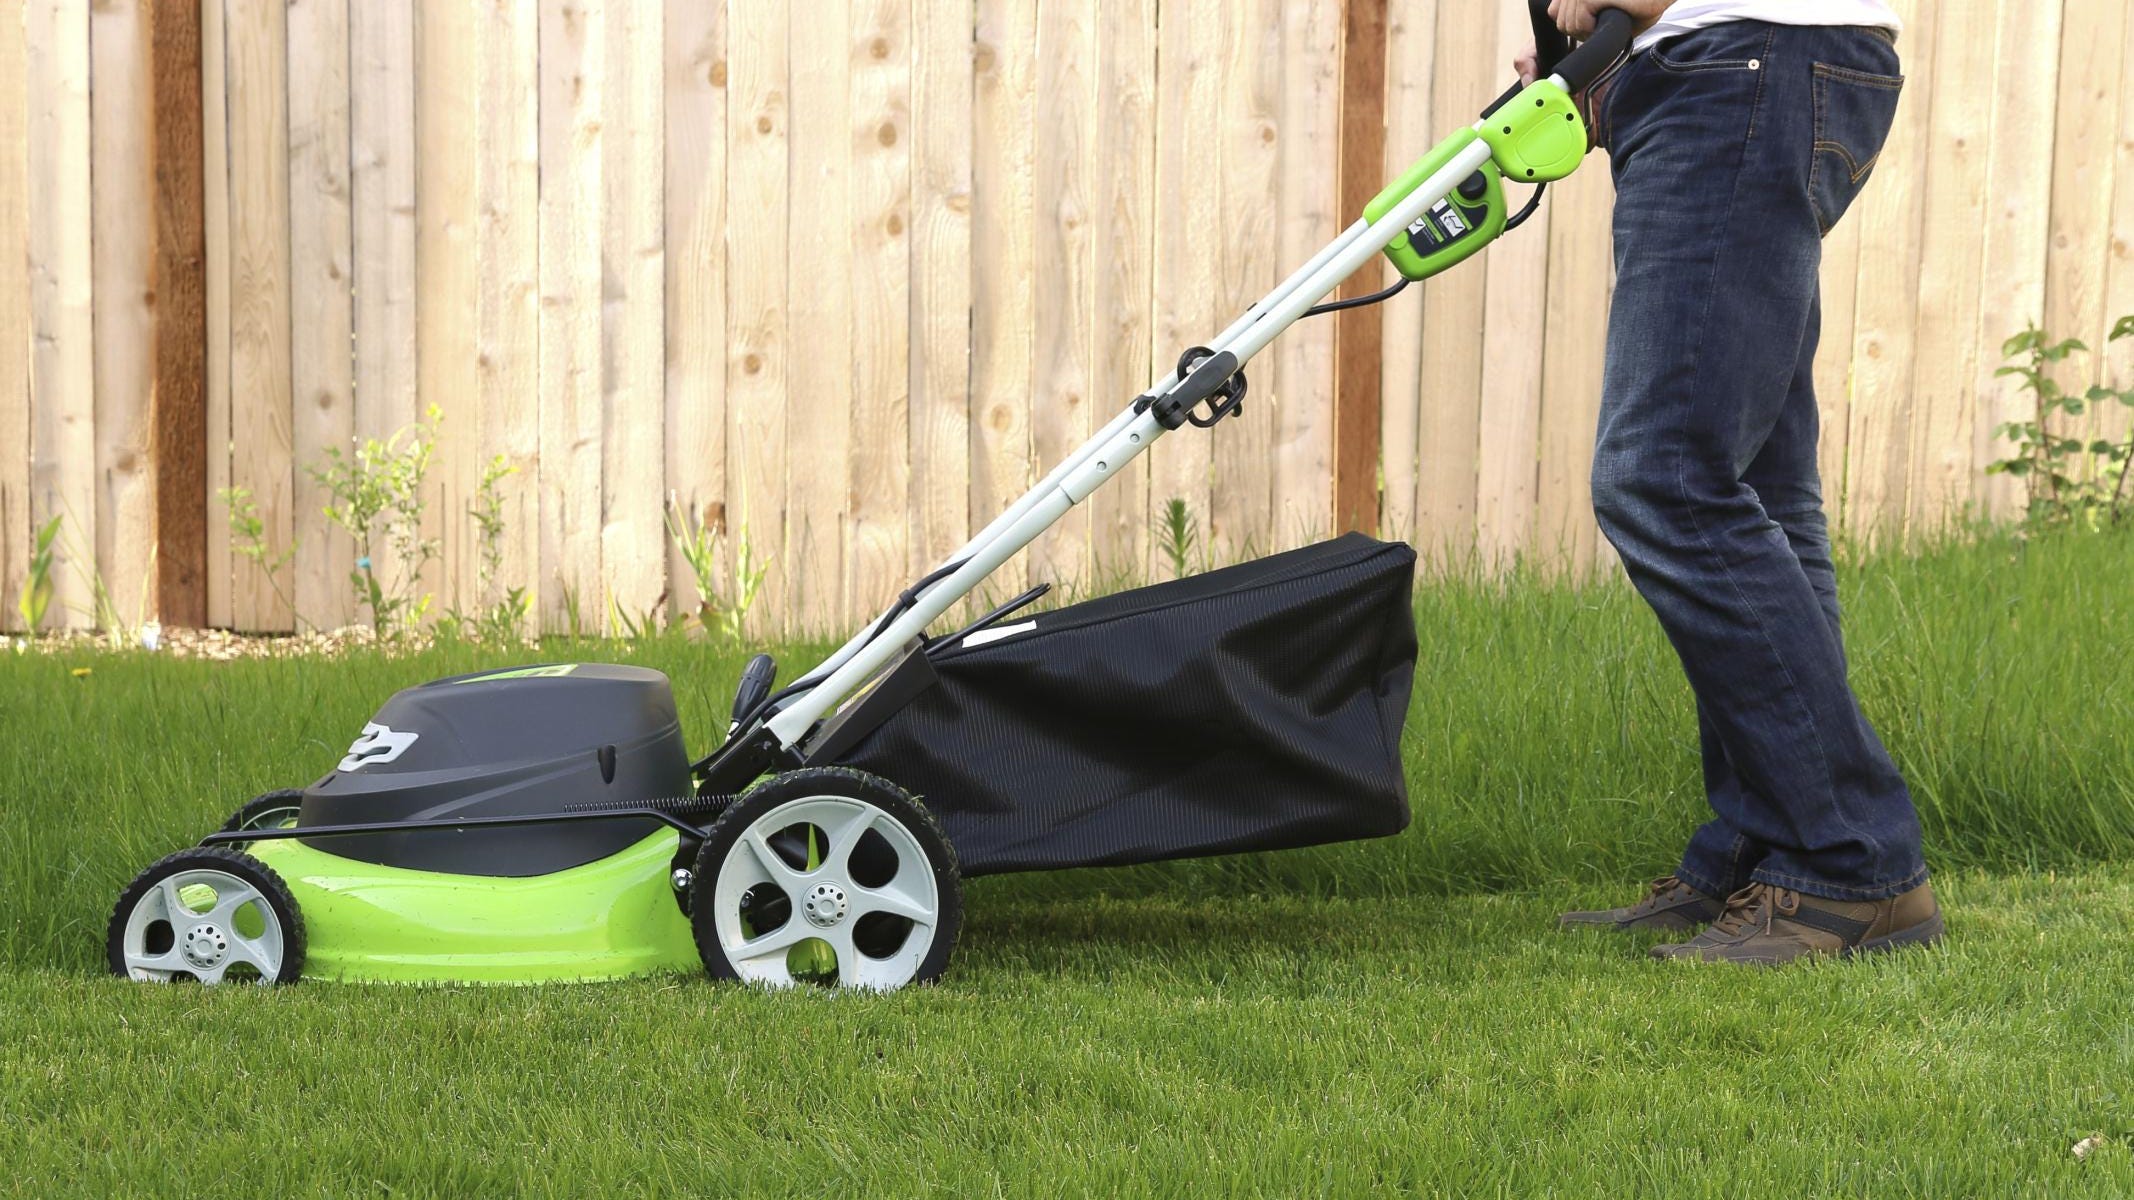 Louisville Offers Rebates For Electric Lawn Care Equipment